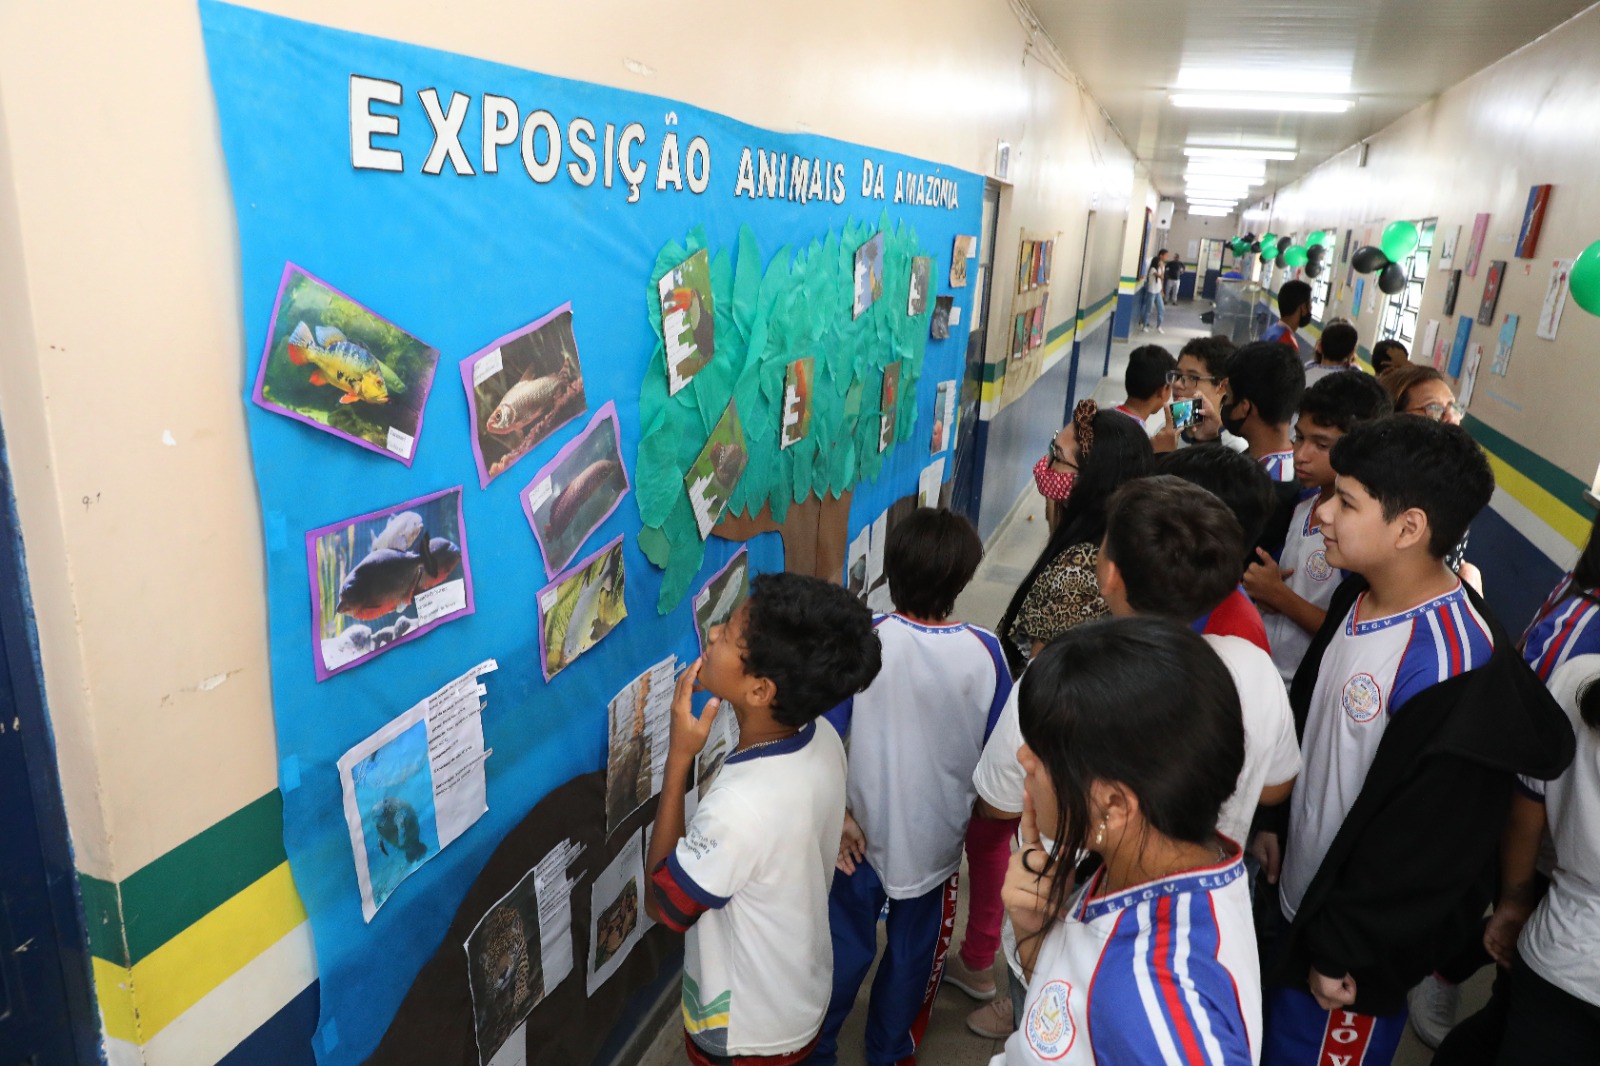 State school promotes multidisciplinary fair with exhibition of scientific initiation projects